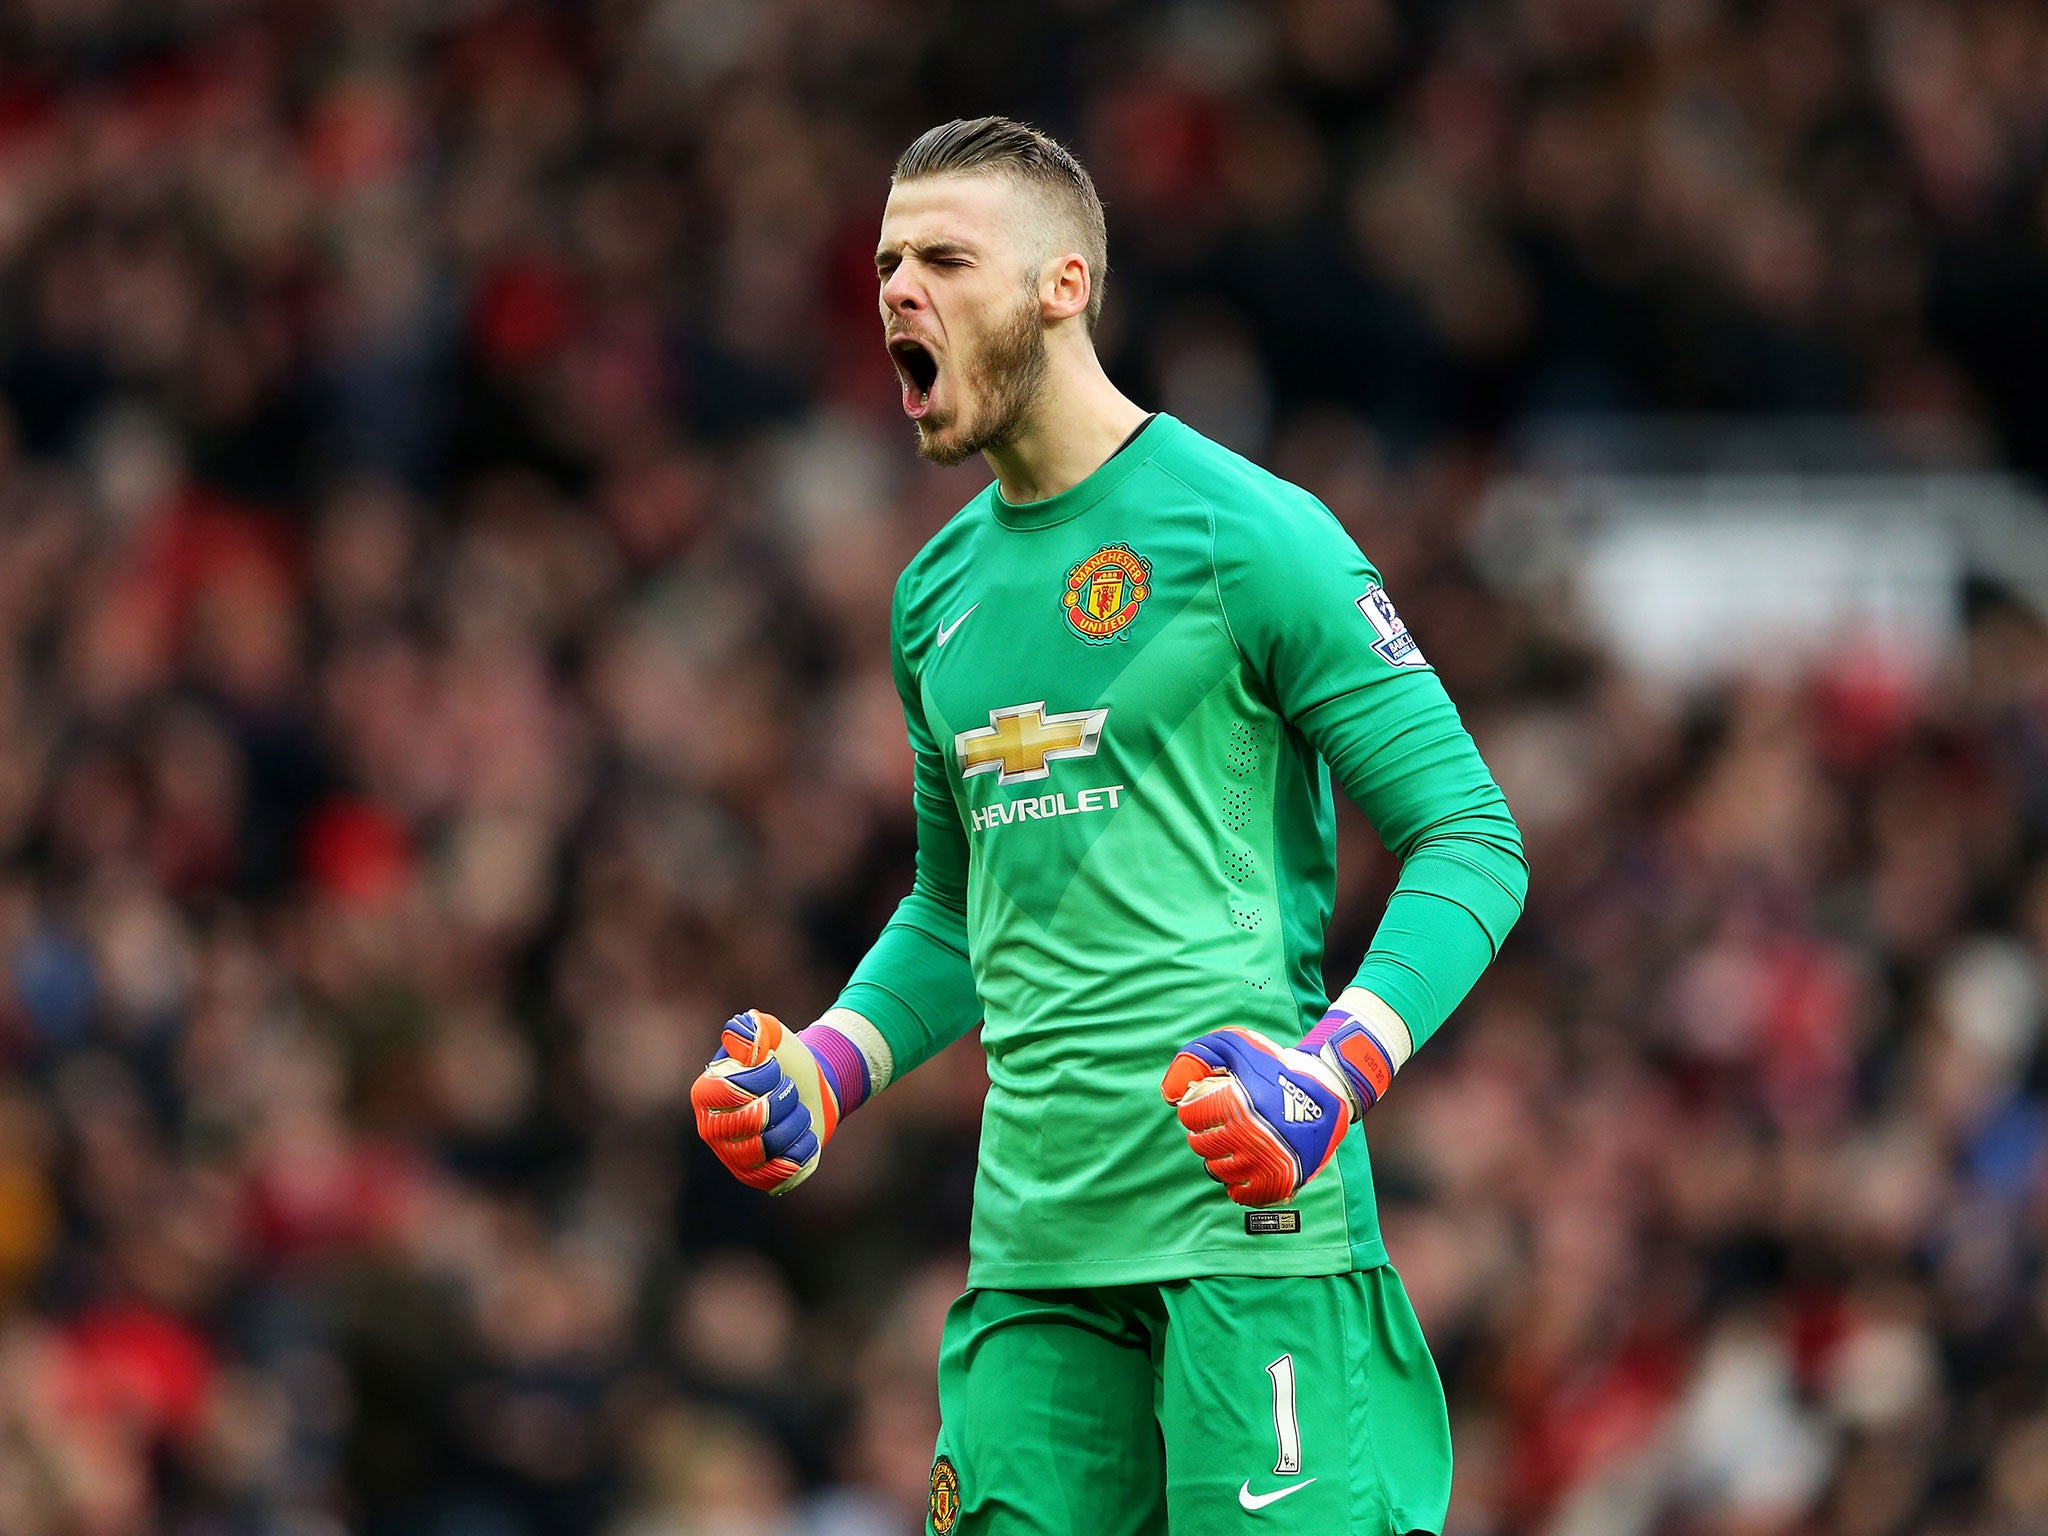 David De Gea has been one of United's standout performers this season